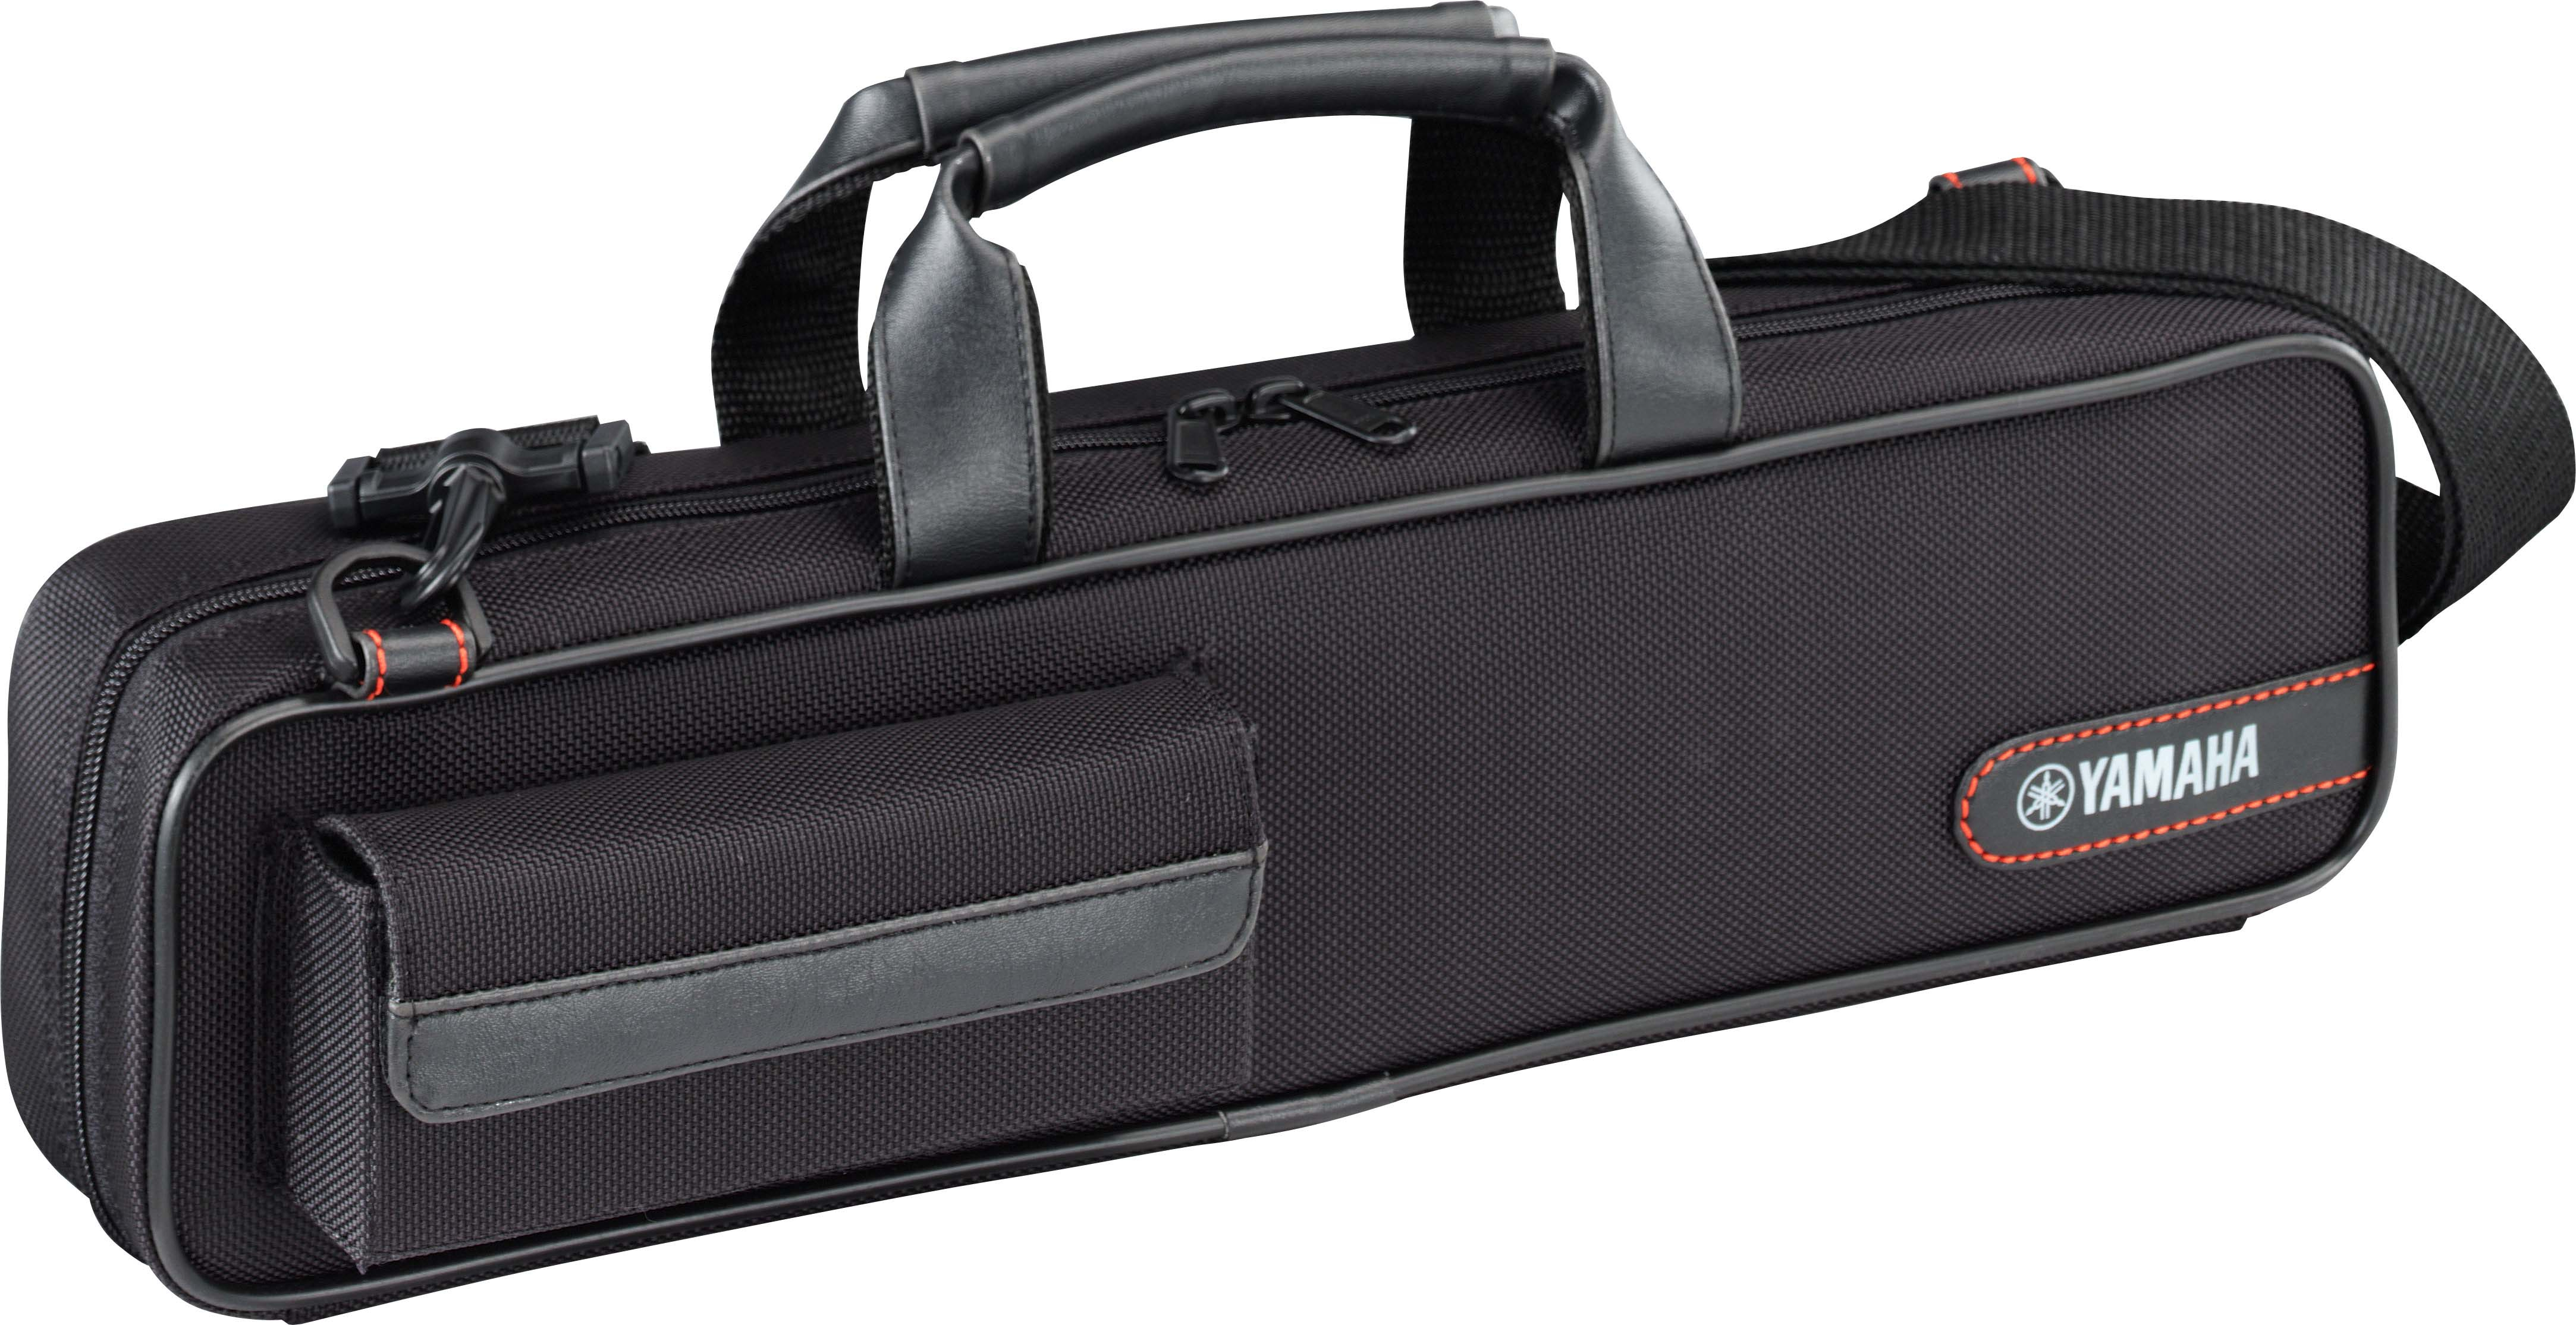 Yamaha Case - Flute + Curved Head Joint Case Cover